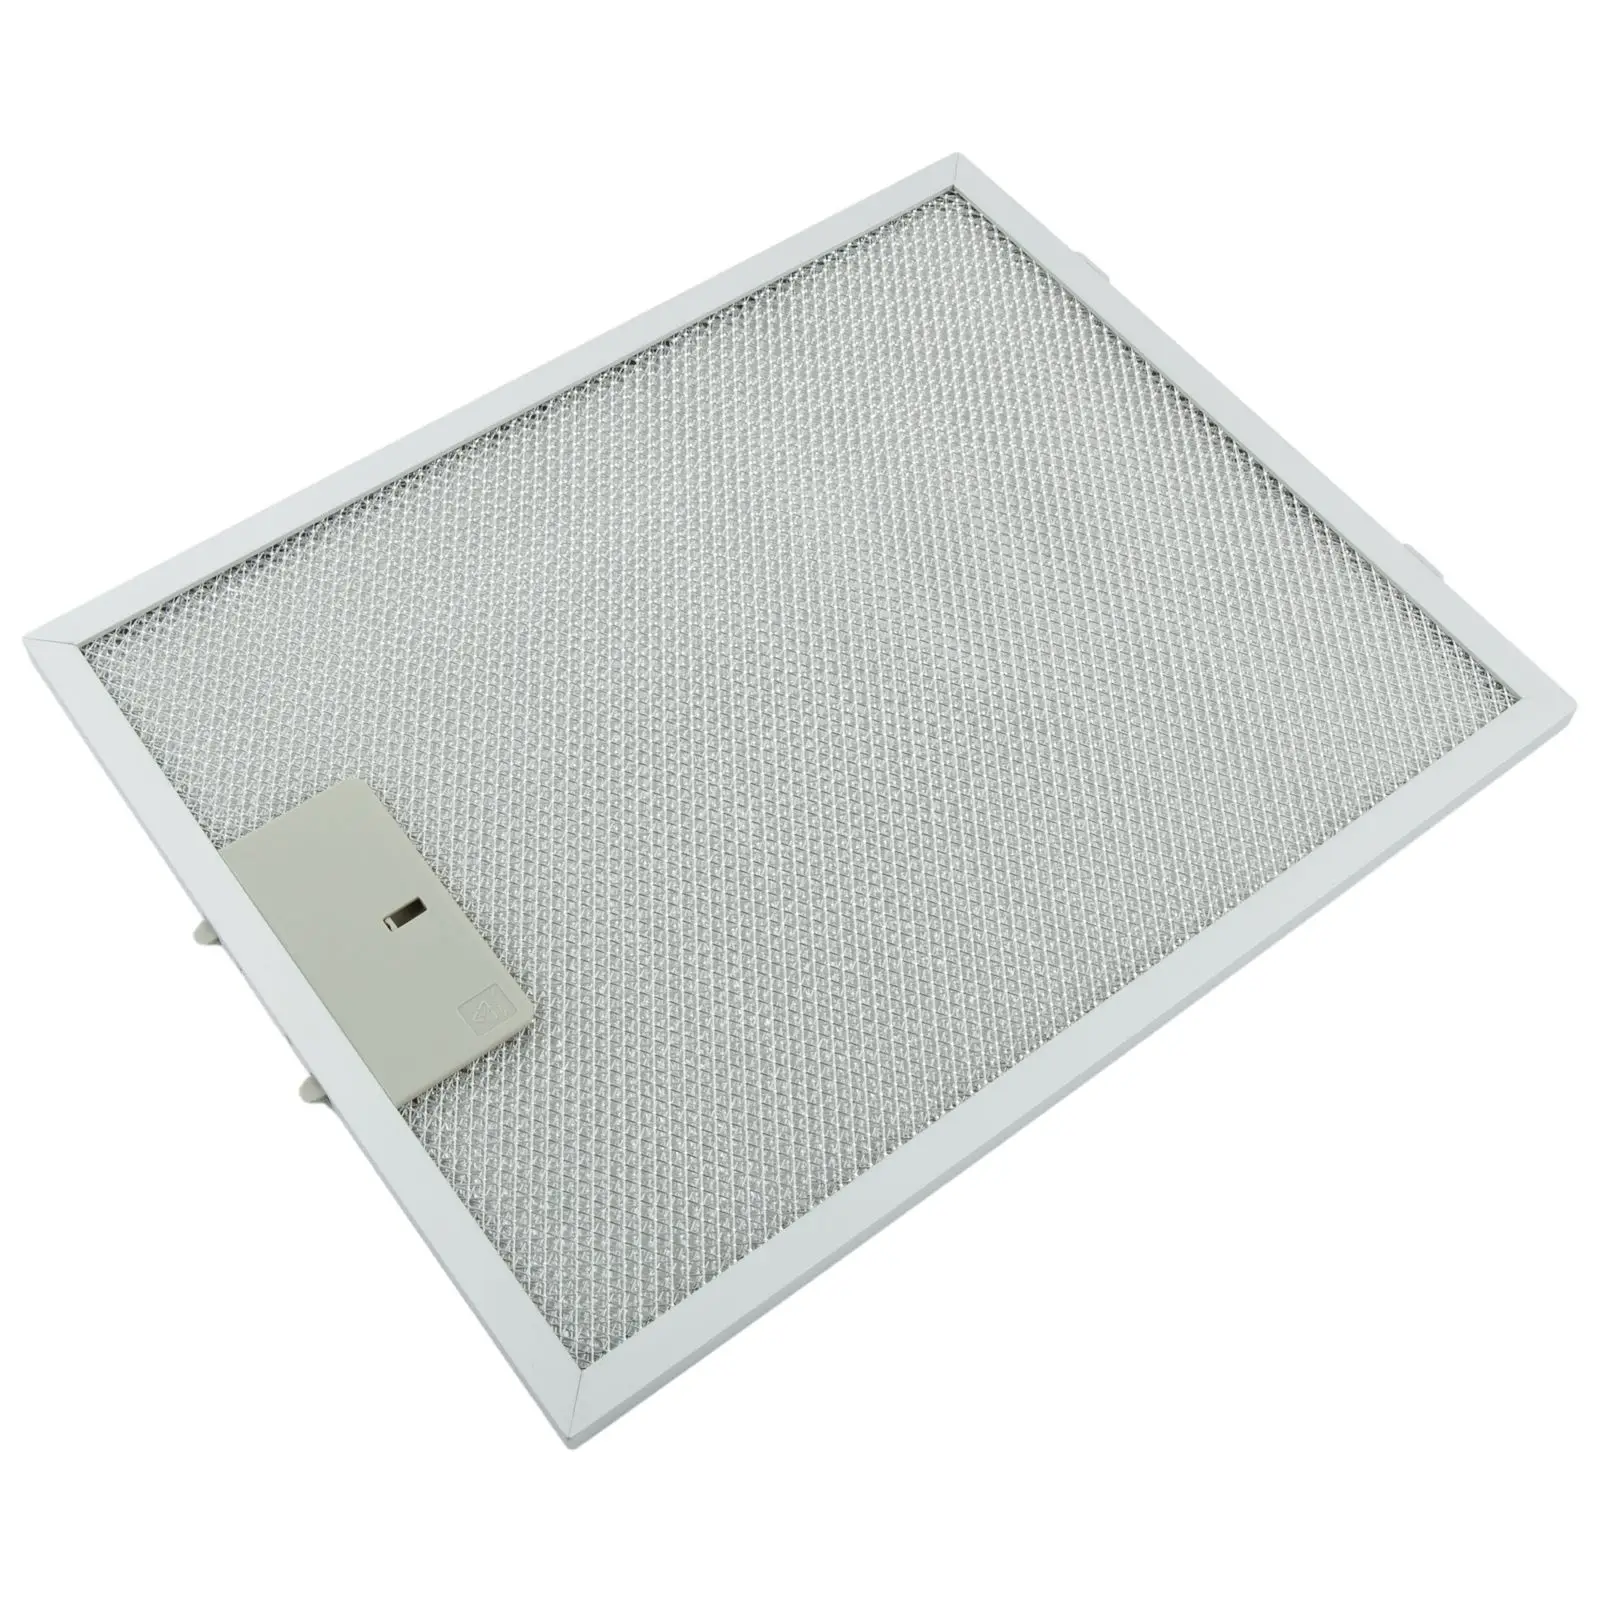 

Exhaust Fans Filter Silver Stainless Steel Universal 1PCS Best Performance Better Filtration Durable High Quality